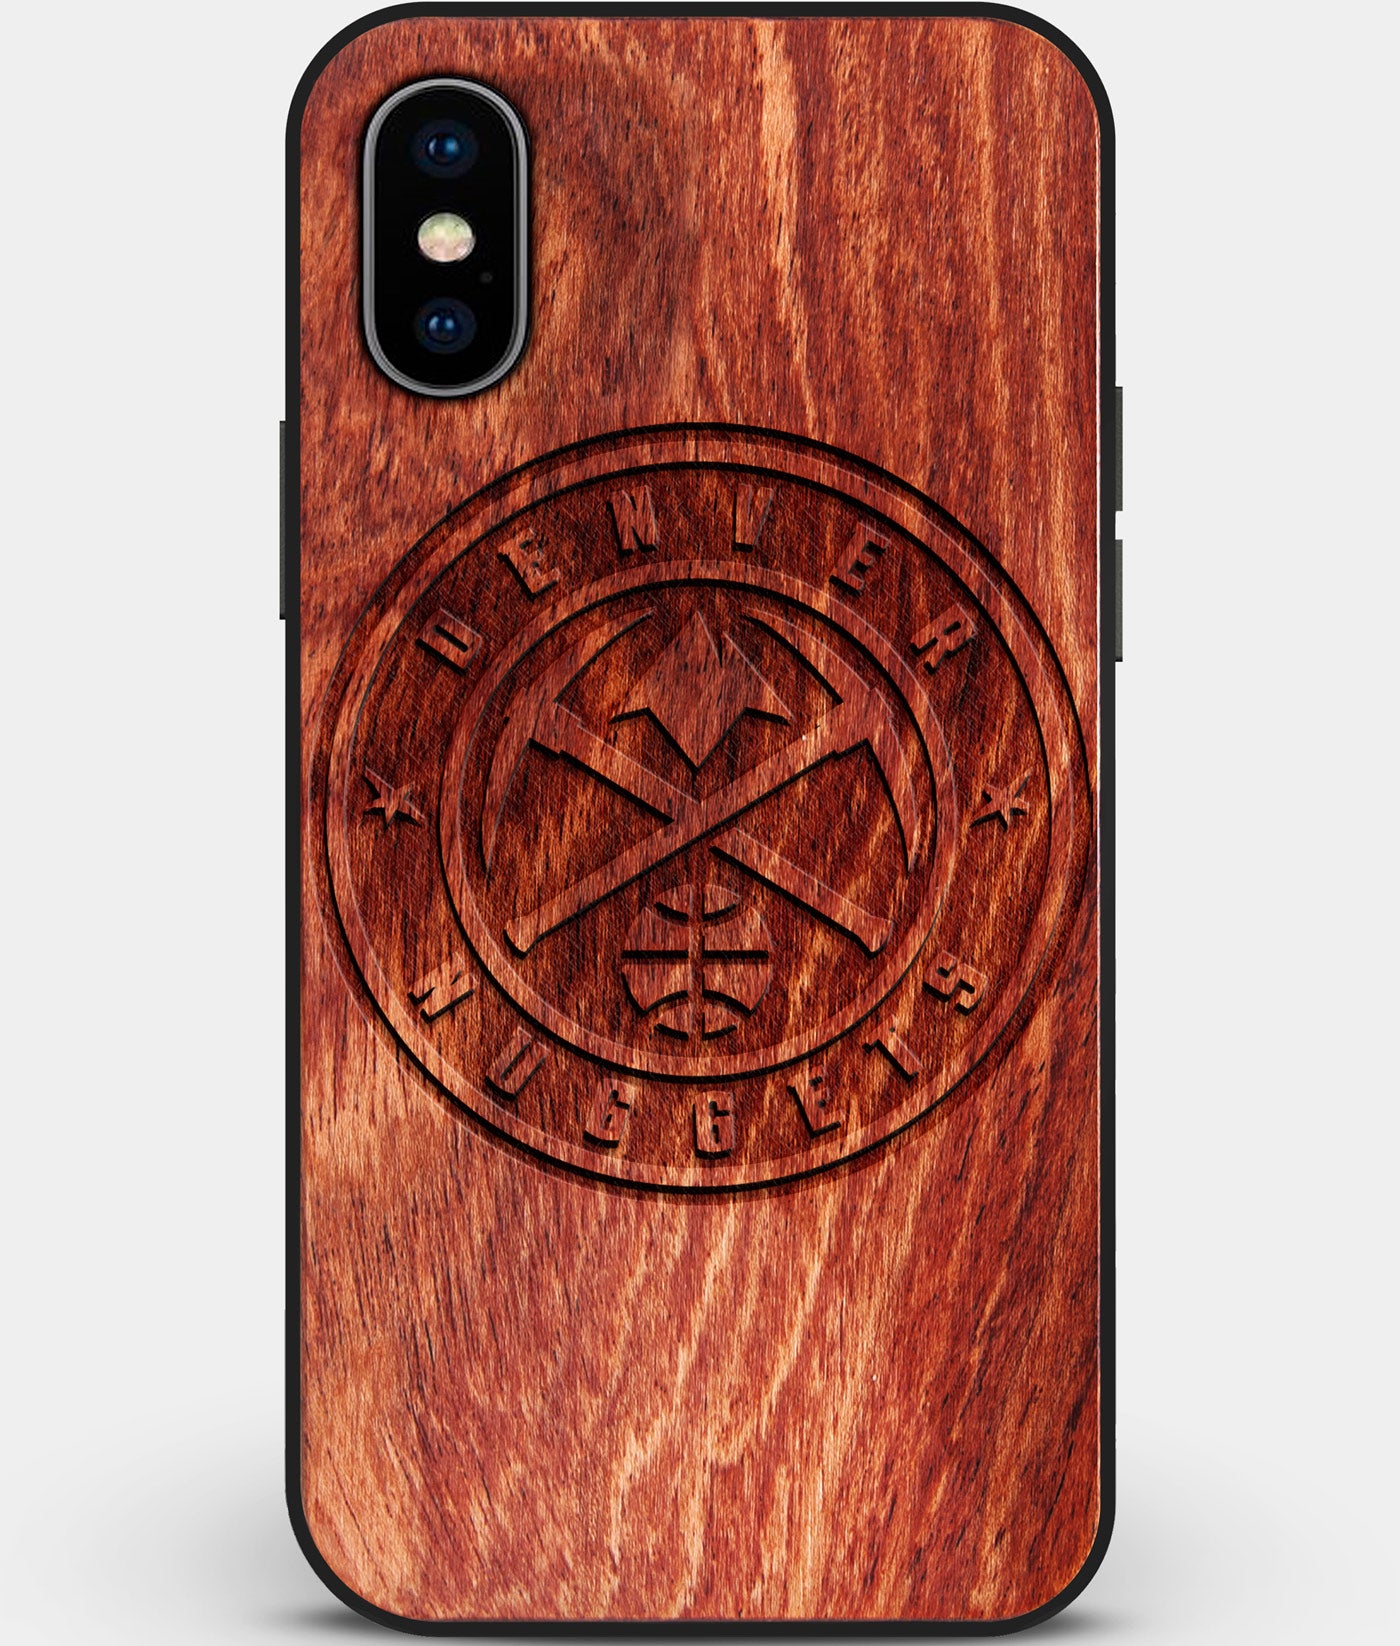 Custom Carved Wood Denver Nuggets iPhone XS Max Case | Personalized Mahogany Wood Denver Nuggets Cover, Birthday Gift, Gifts For Him, Monogrammed Gift For Fan | by Engraved In Nature